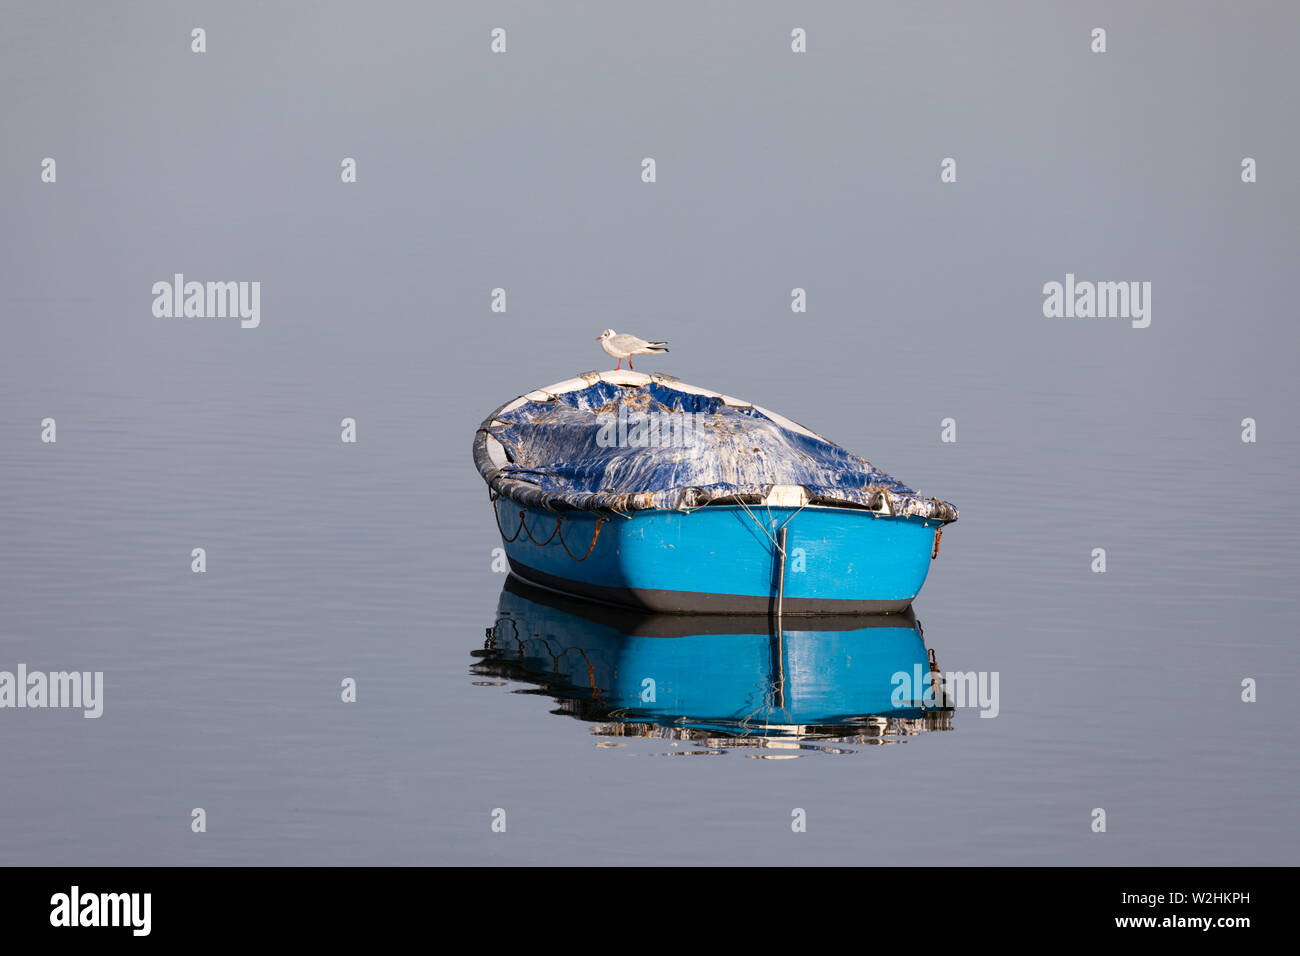 Rugby, Warfwickshire, UK: A small blue boat floating and reflecting on nearly still water. A black-headed gull stands on the prow. Stock Photo